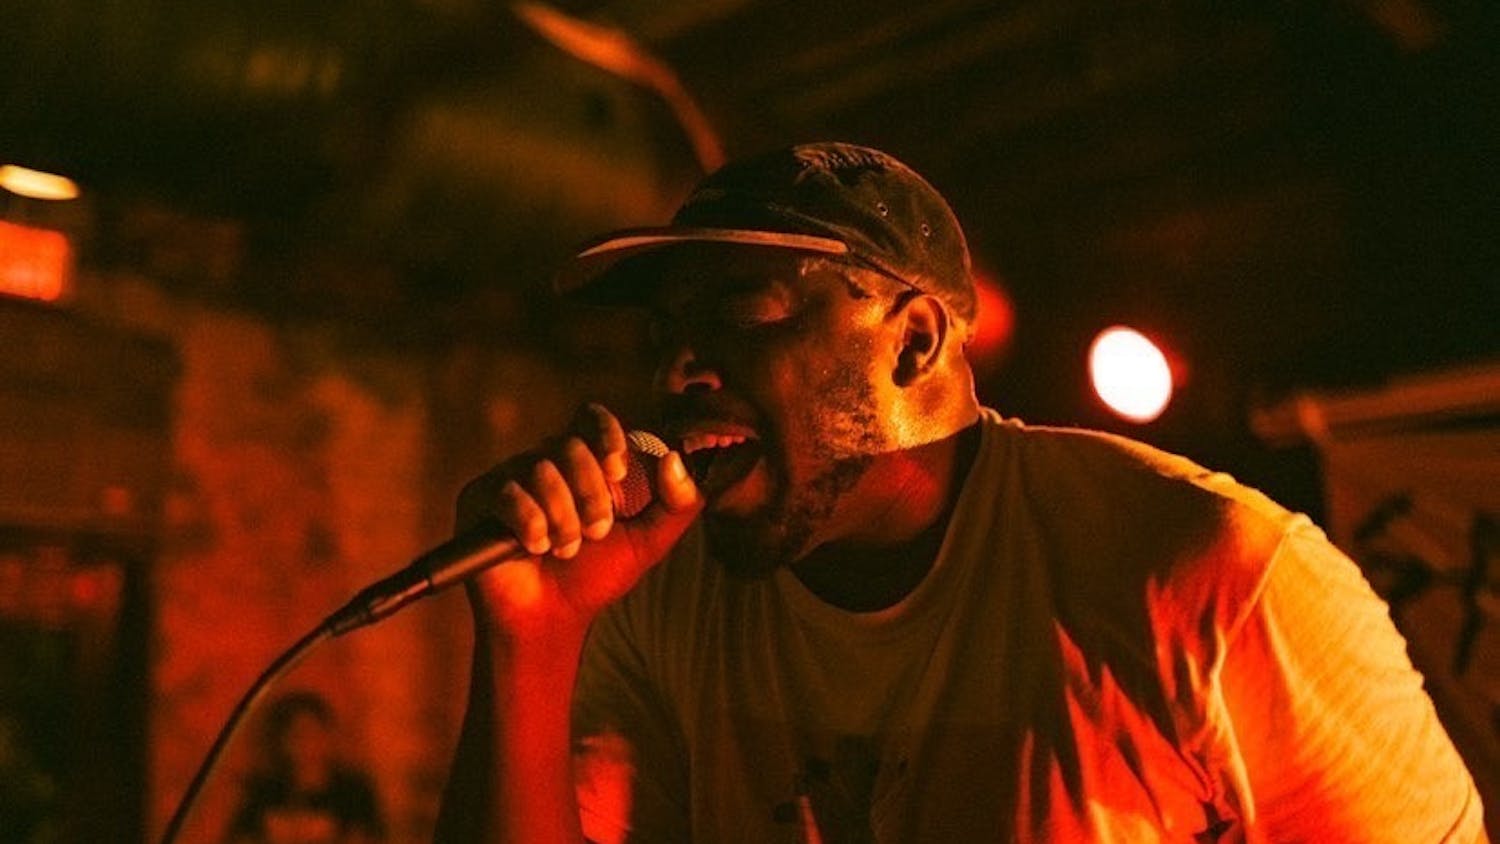 Rapper Sky Luca$ is one of several up-and-coming artists regularly perform across Gainesville venues.